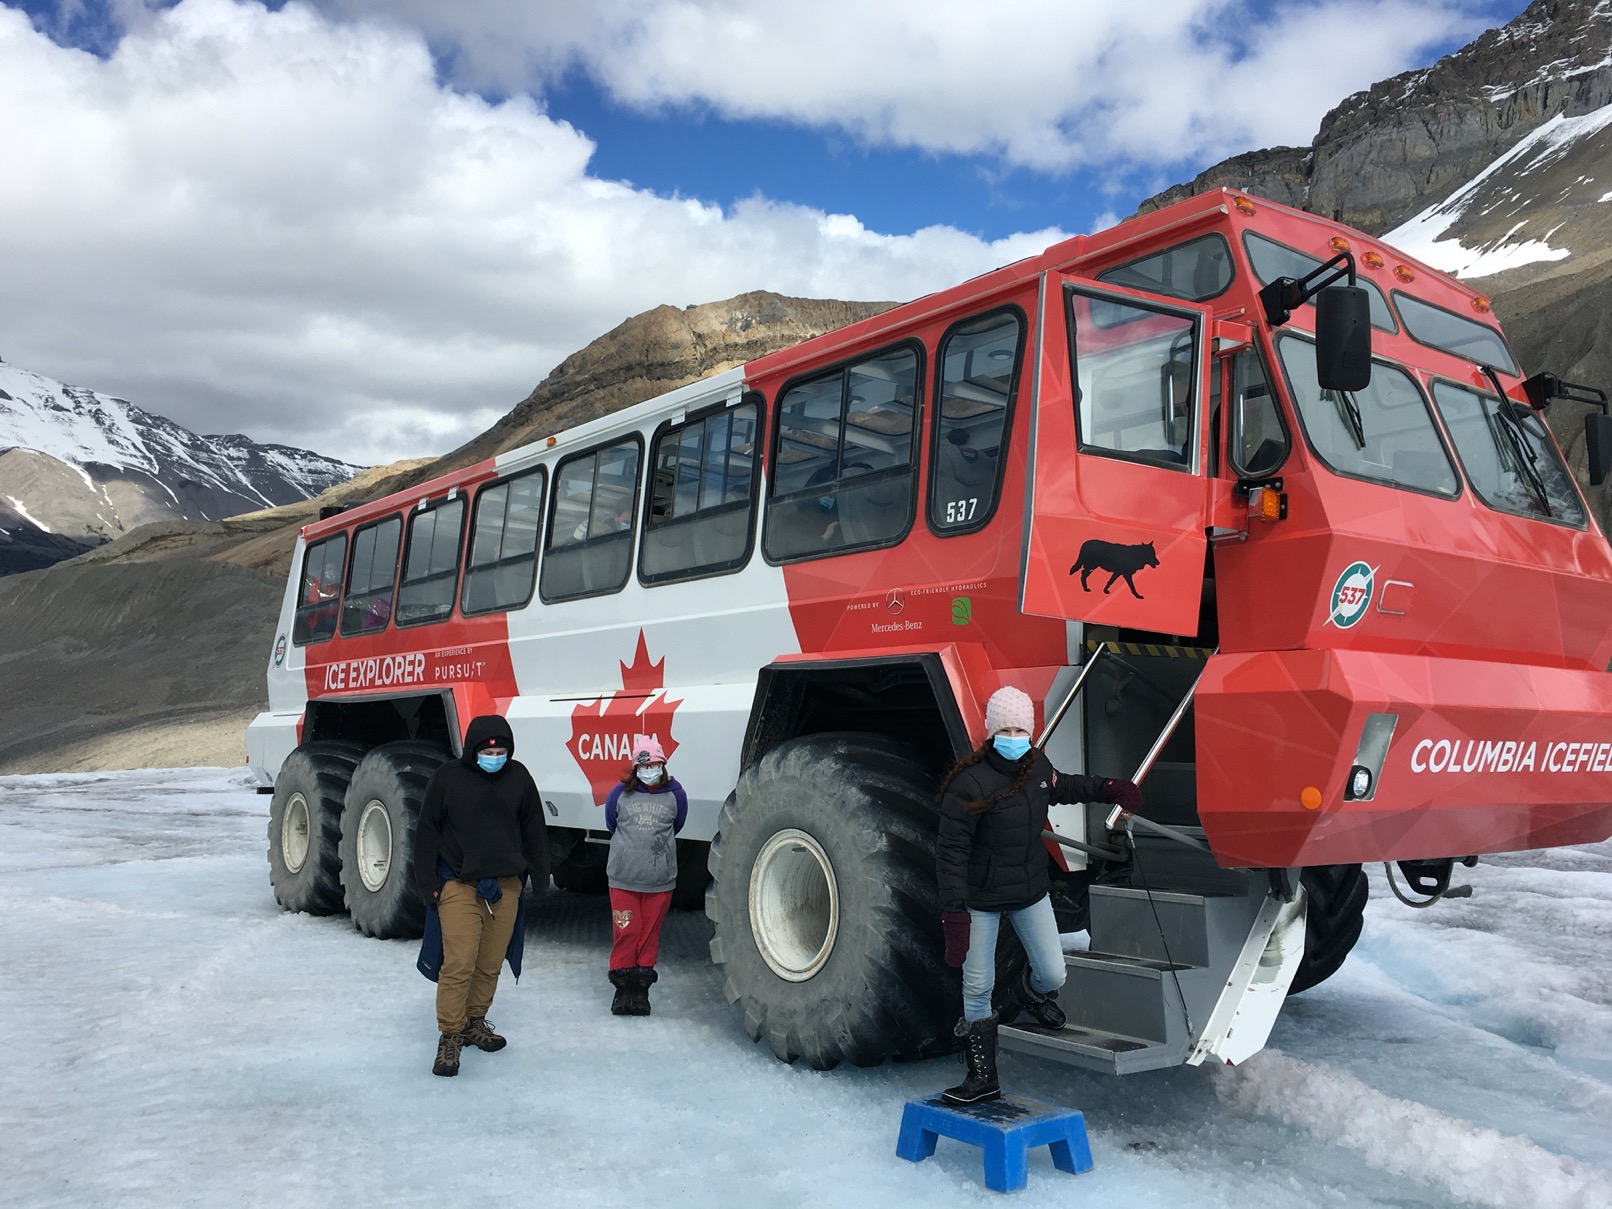 Exploring the Athabasca Glacier at the Columbia Icefield